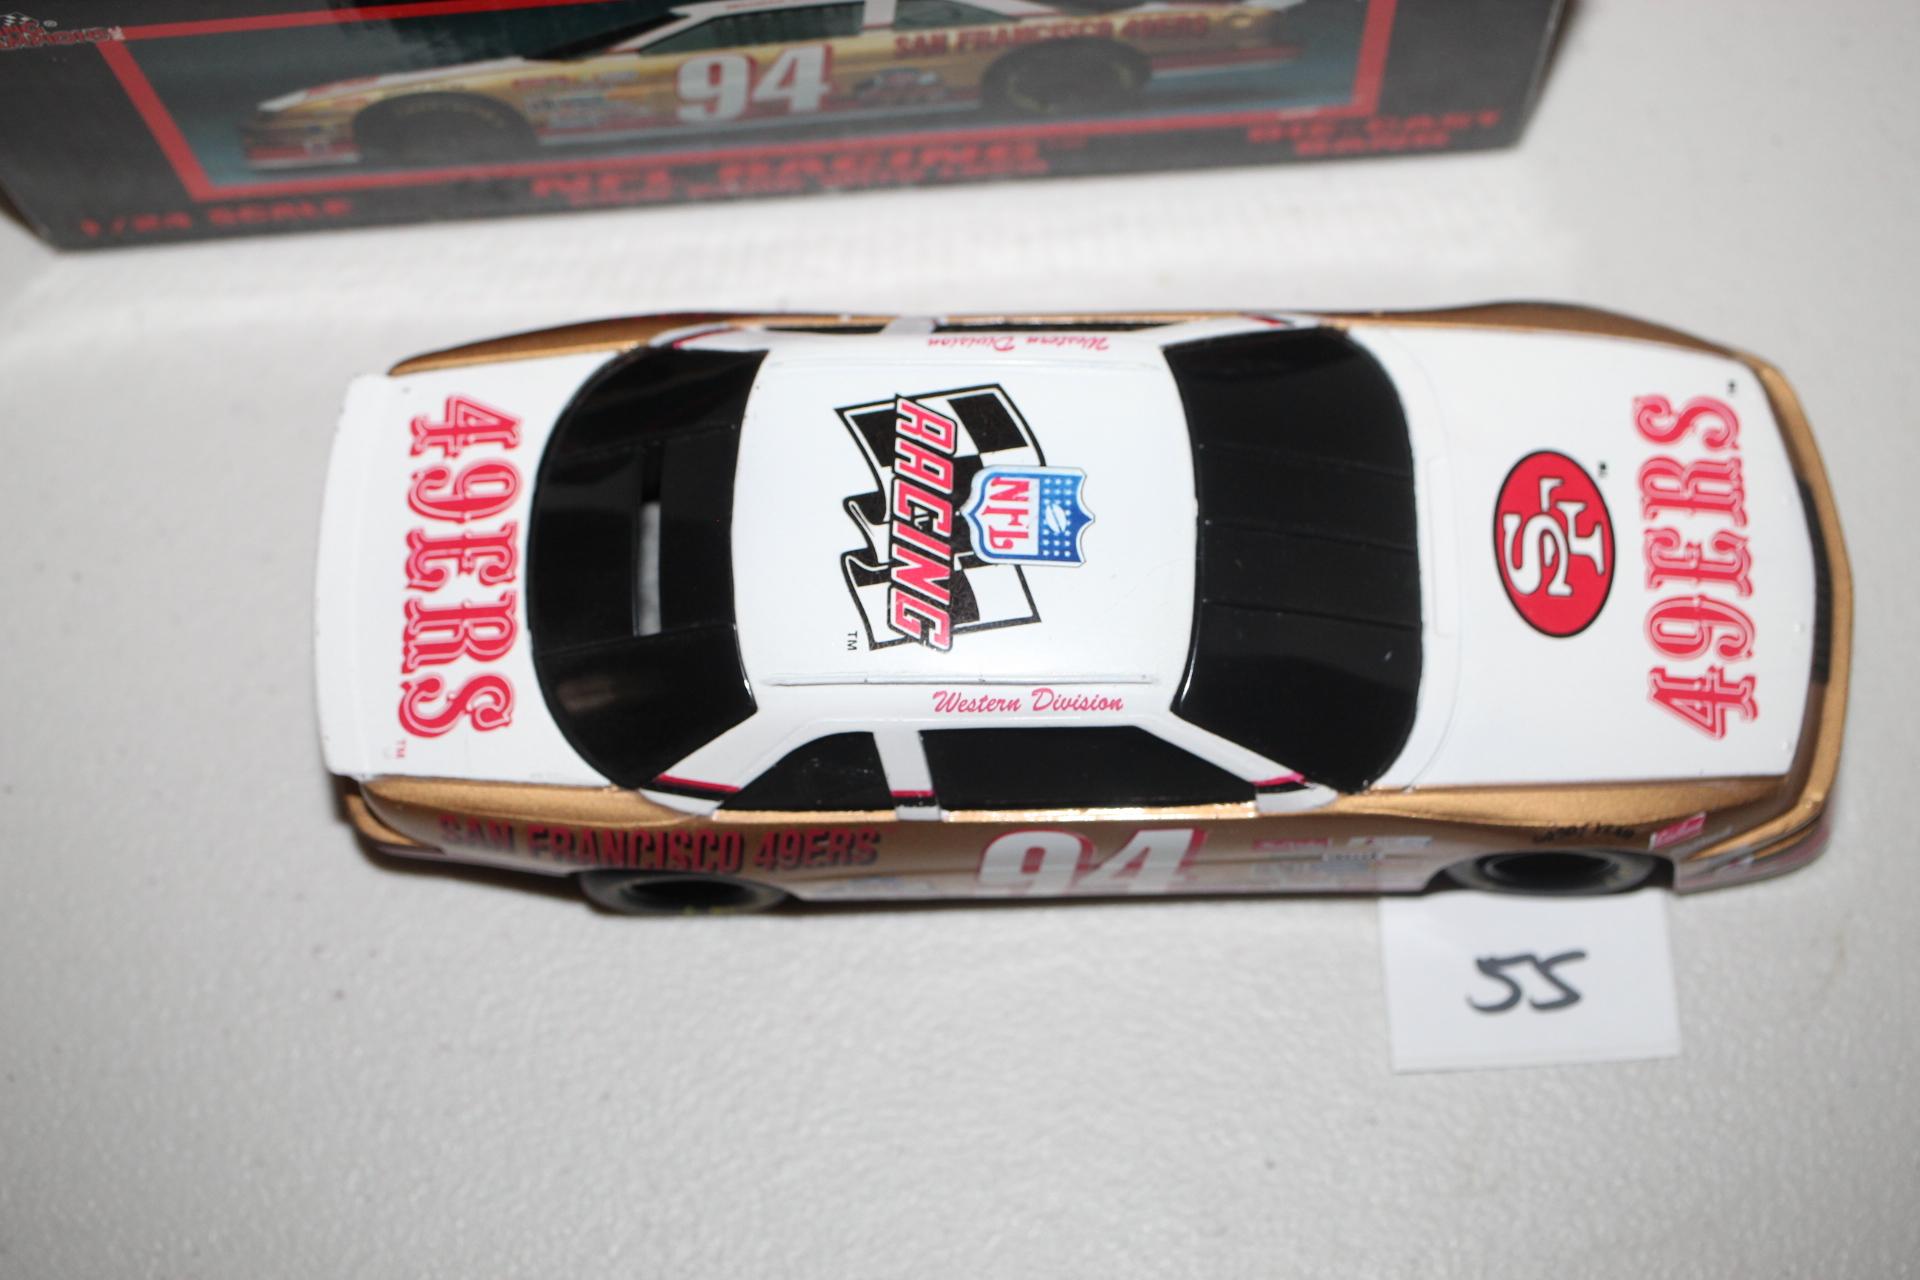 San Francisco 49ers Die Cast NFL Racing Coin Bank With Lock, 1/24 Scale, Racing Champions